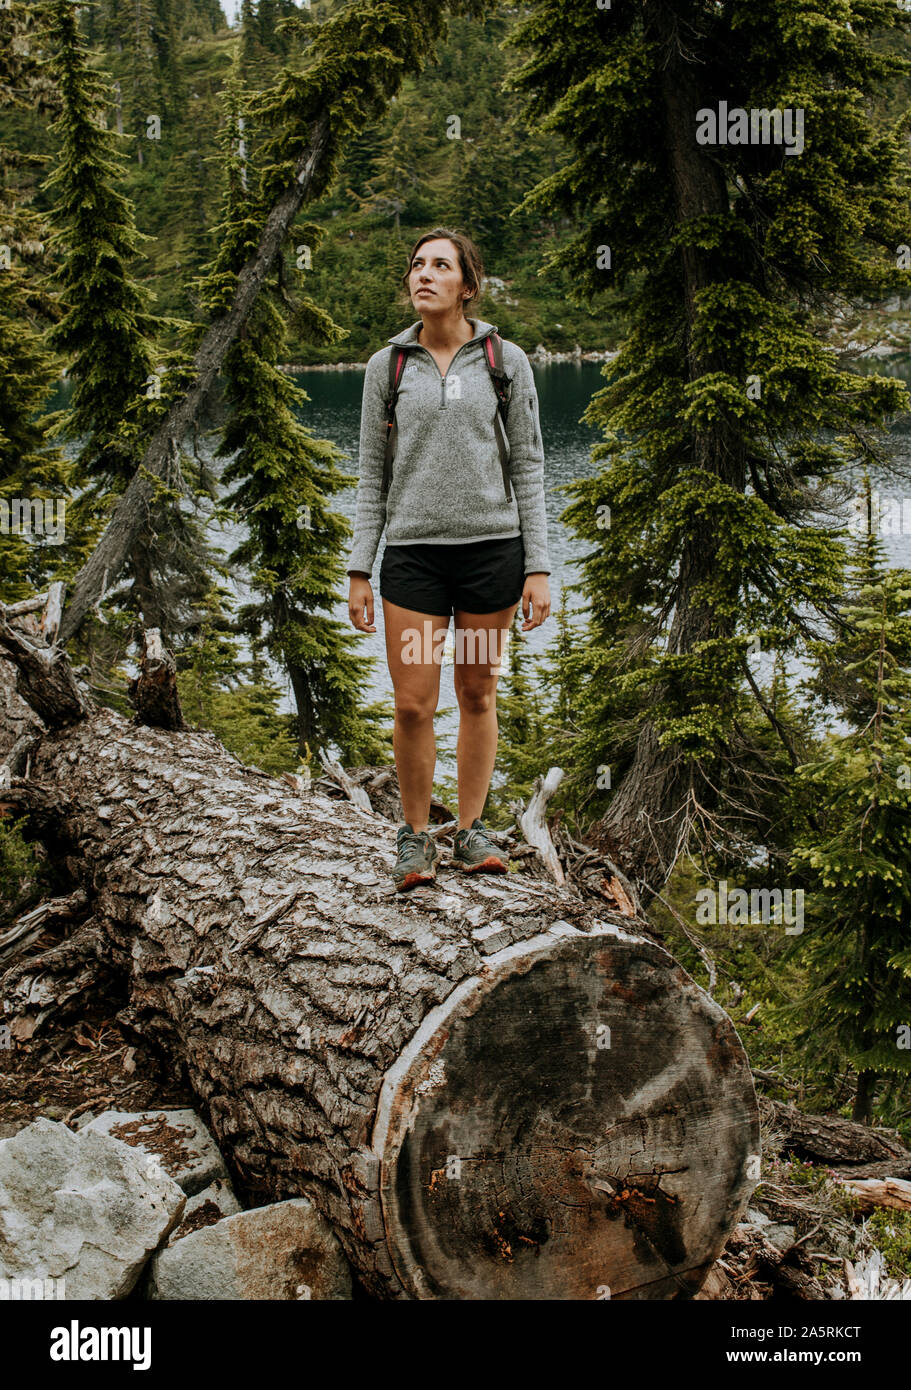 A female hiker with a sweater stands on a giant log near a lake Stock Photo